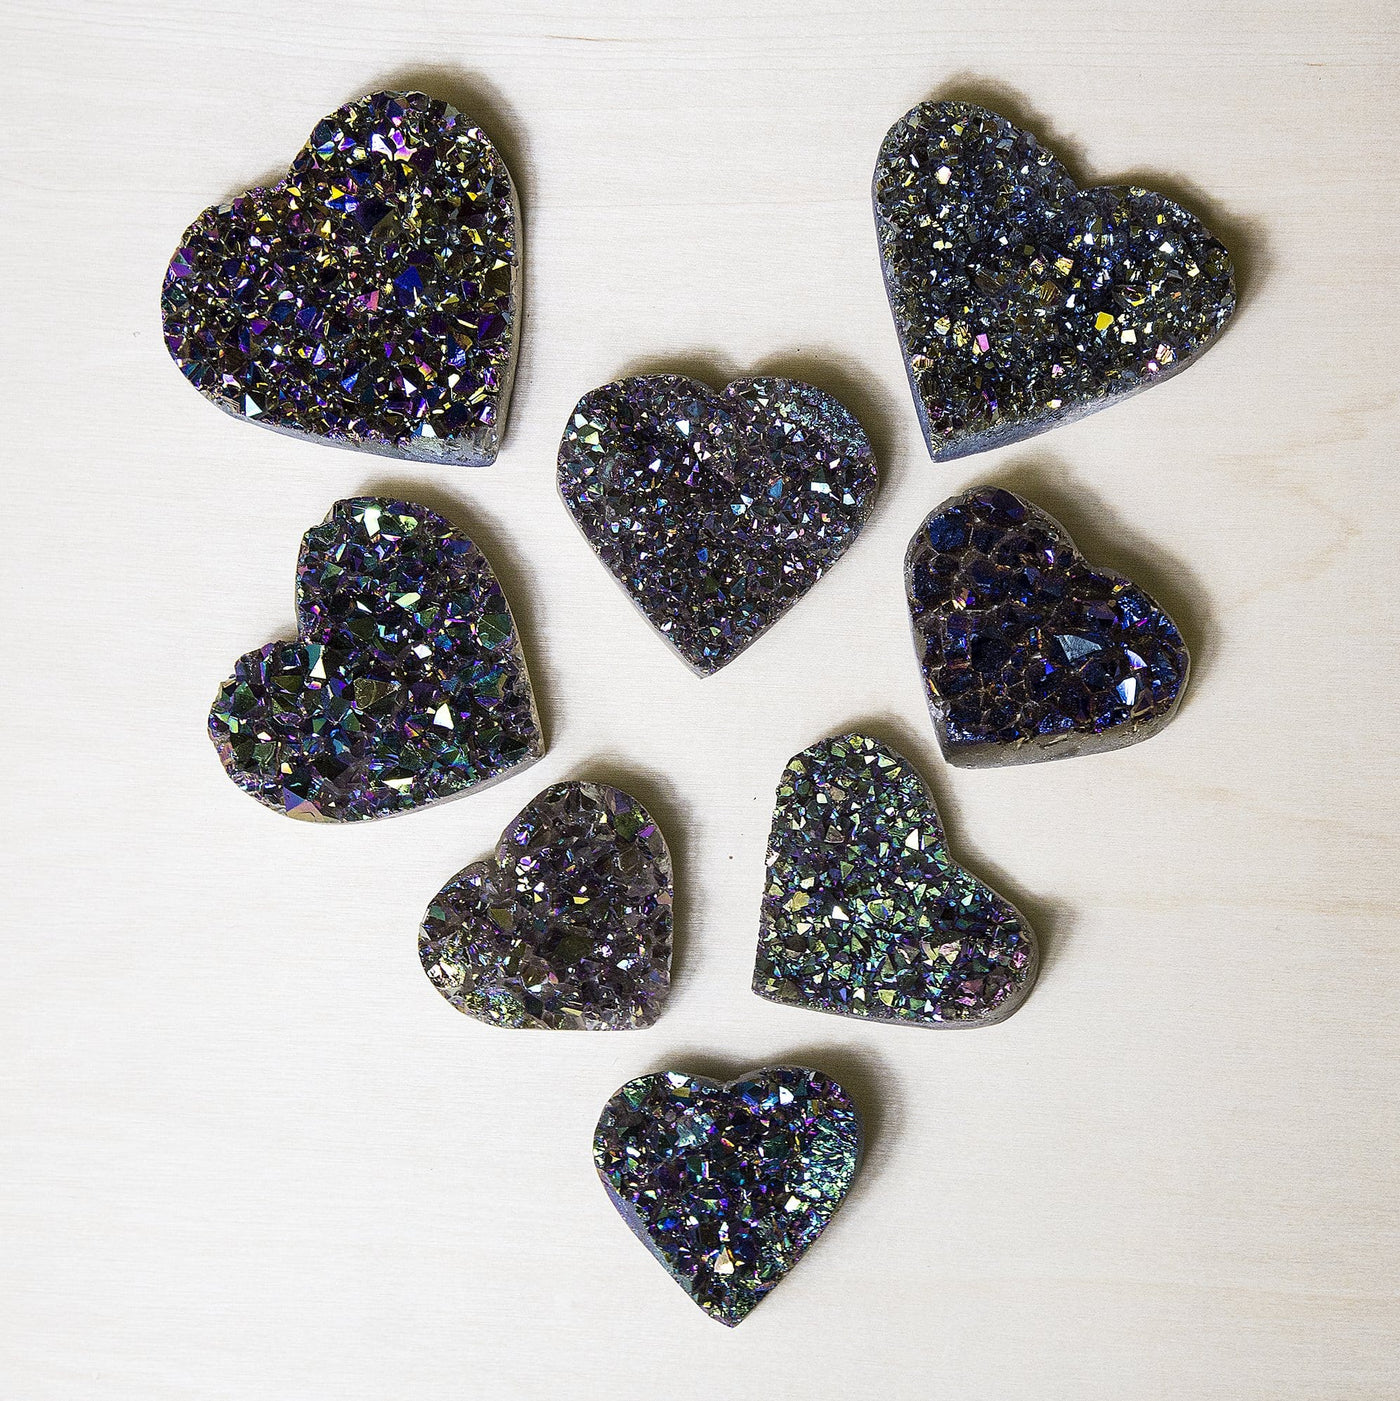 close up view of several titanium hearts on a light background